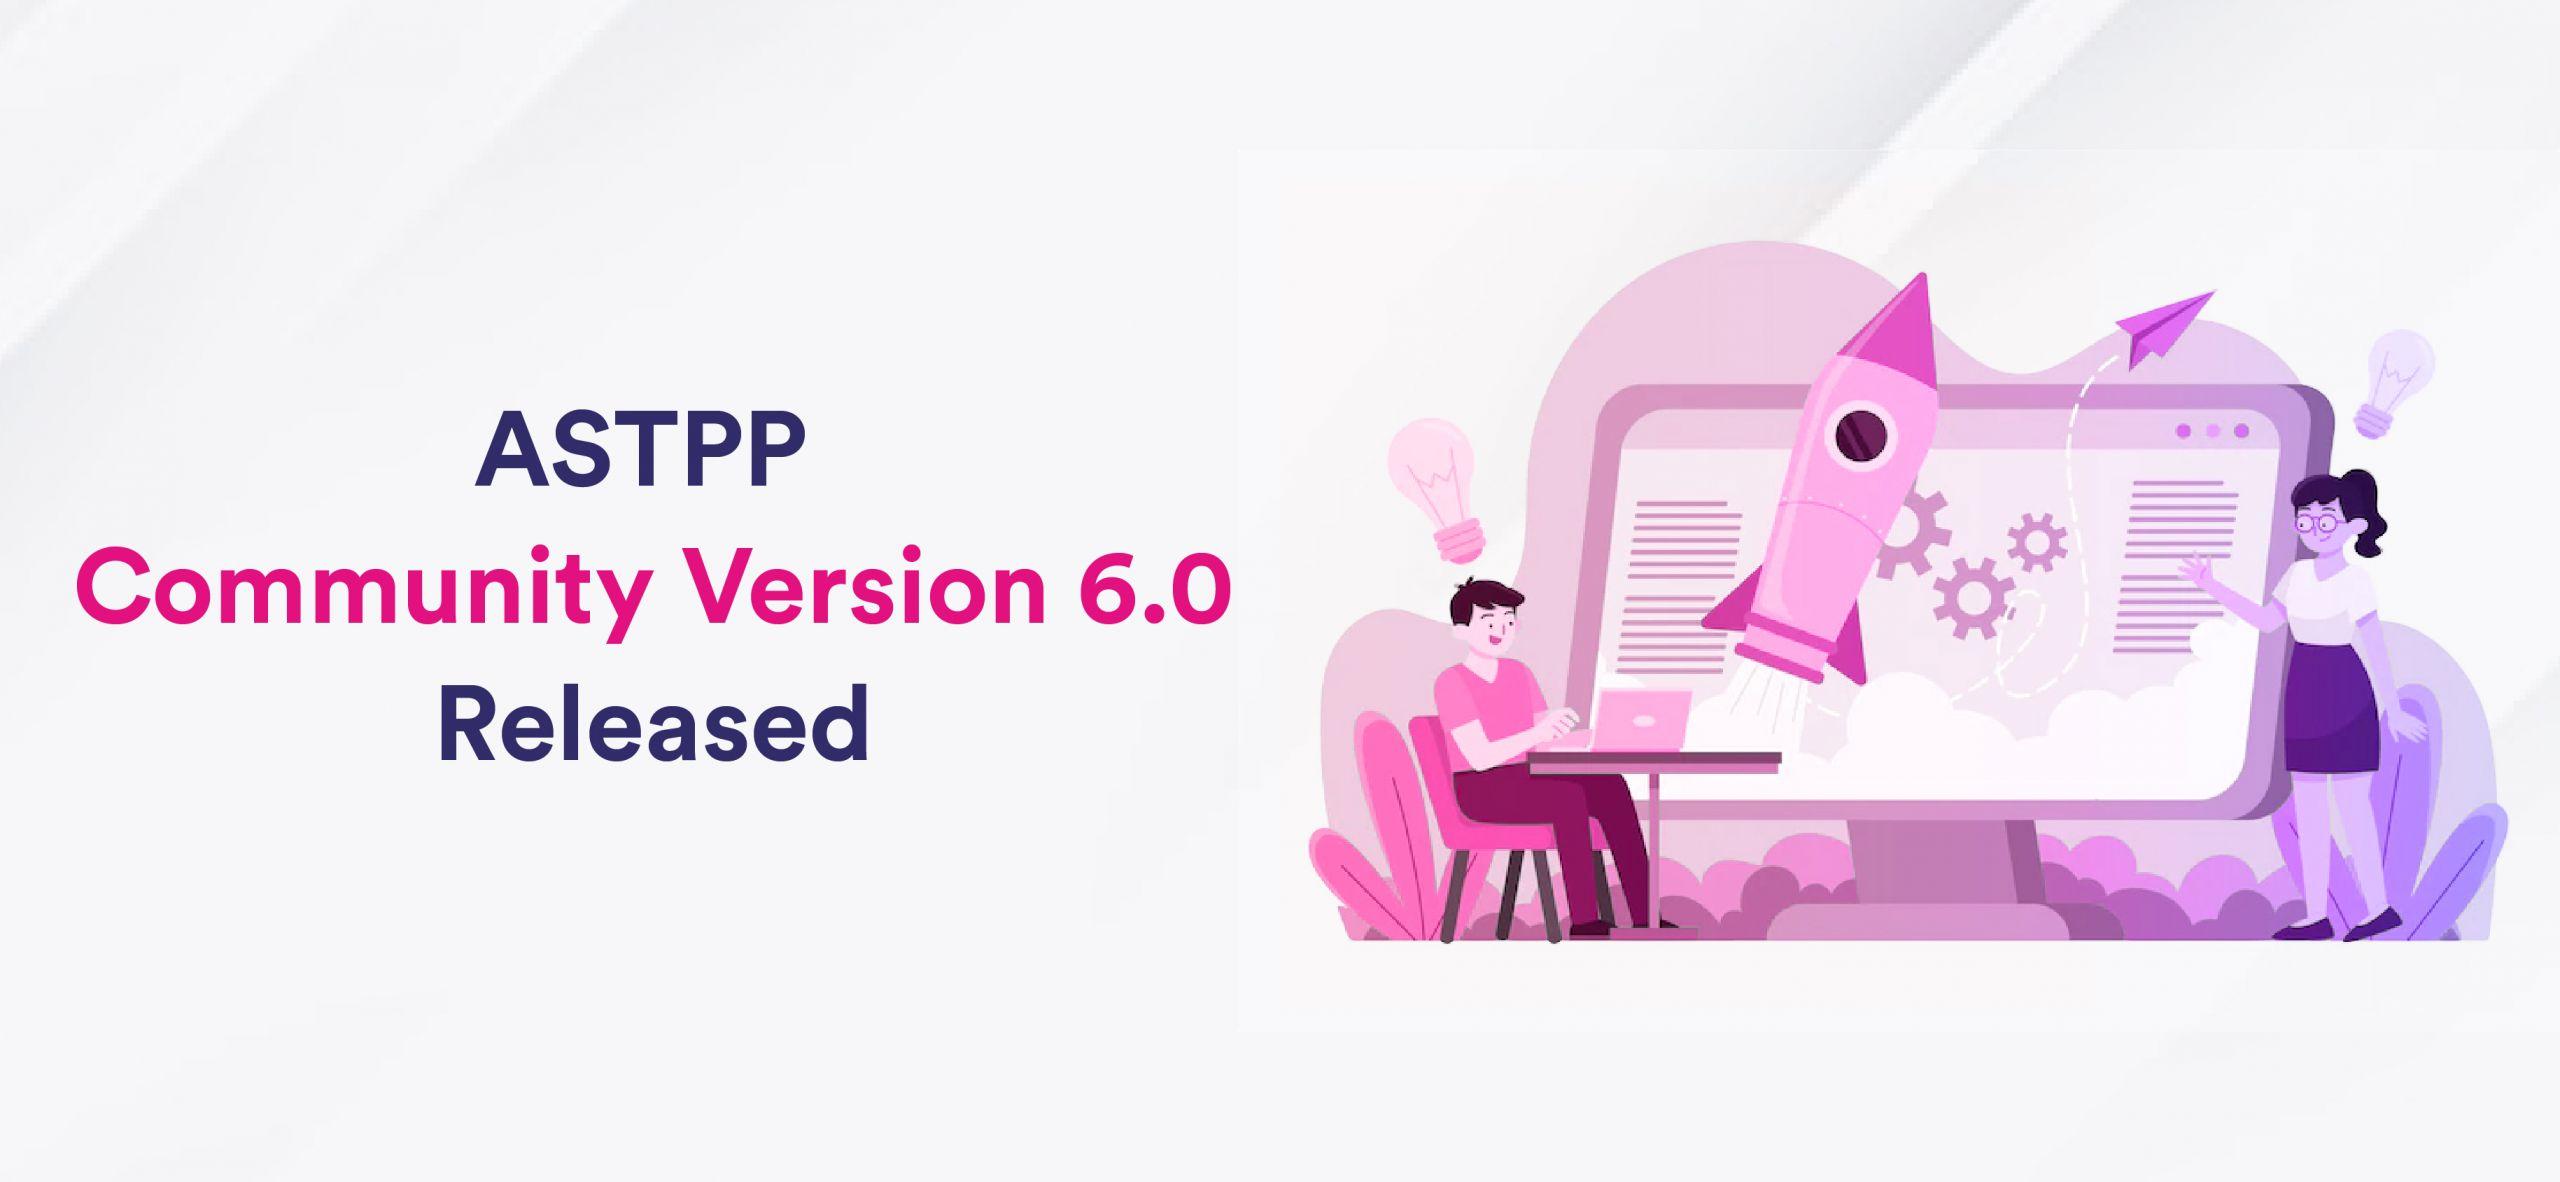 ASTPP Community Version 6.0 is Released